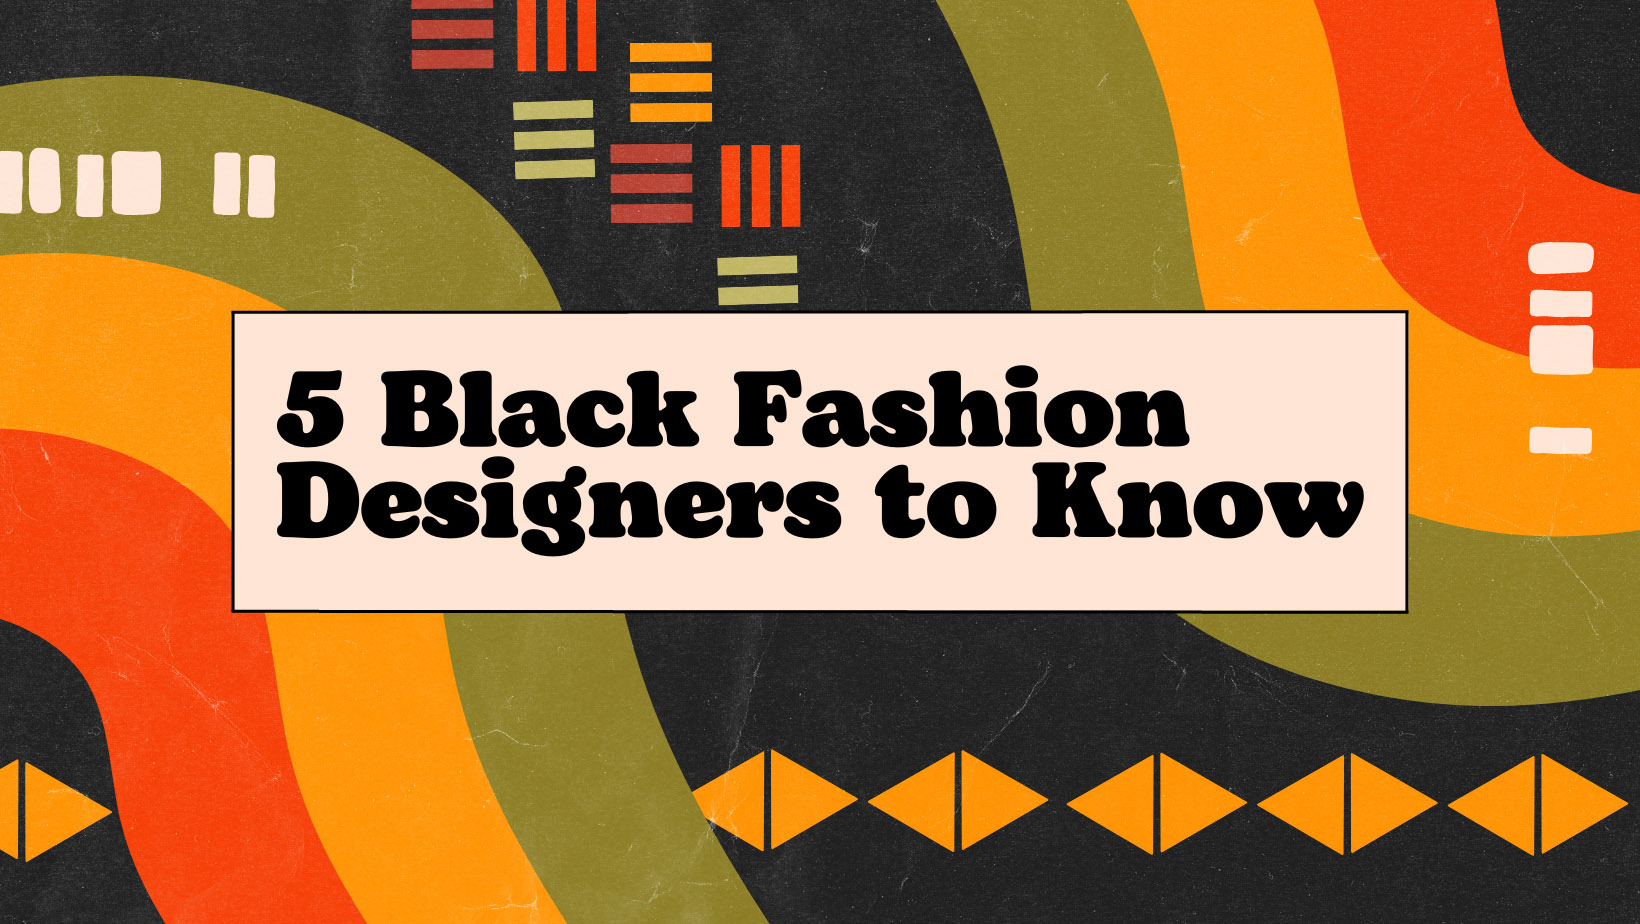 5 Black Fashion Designers to Know [text overlayed on red, green, and yellow swirls and patterns on a black background]